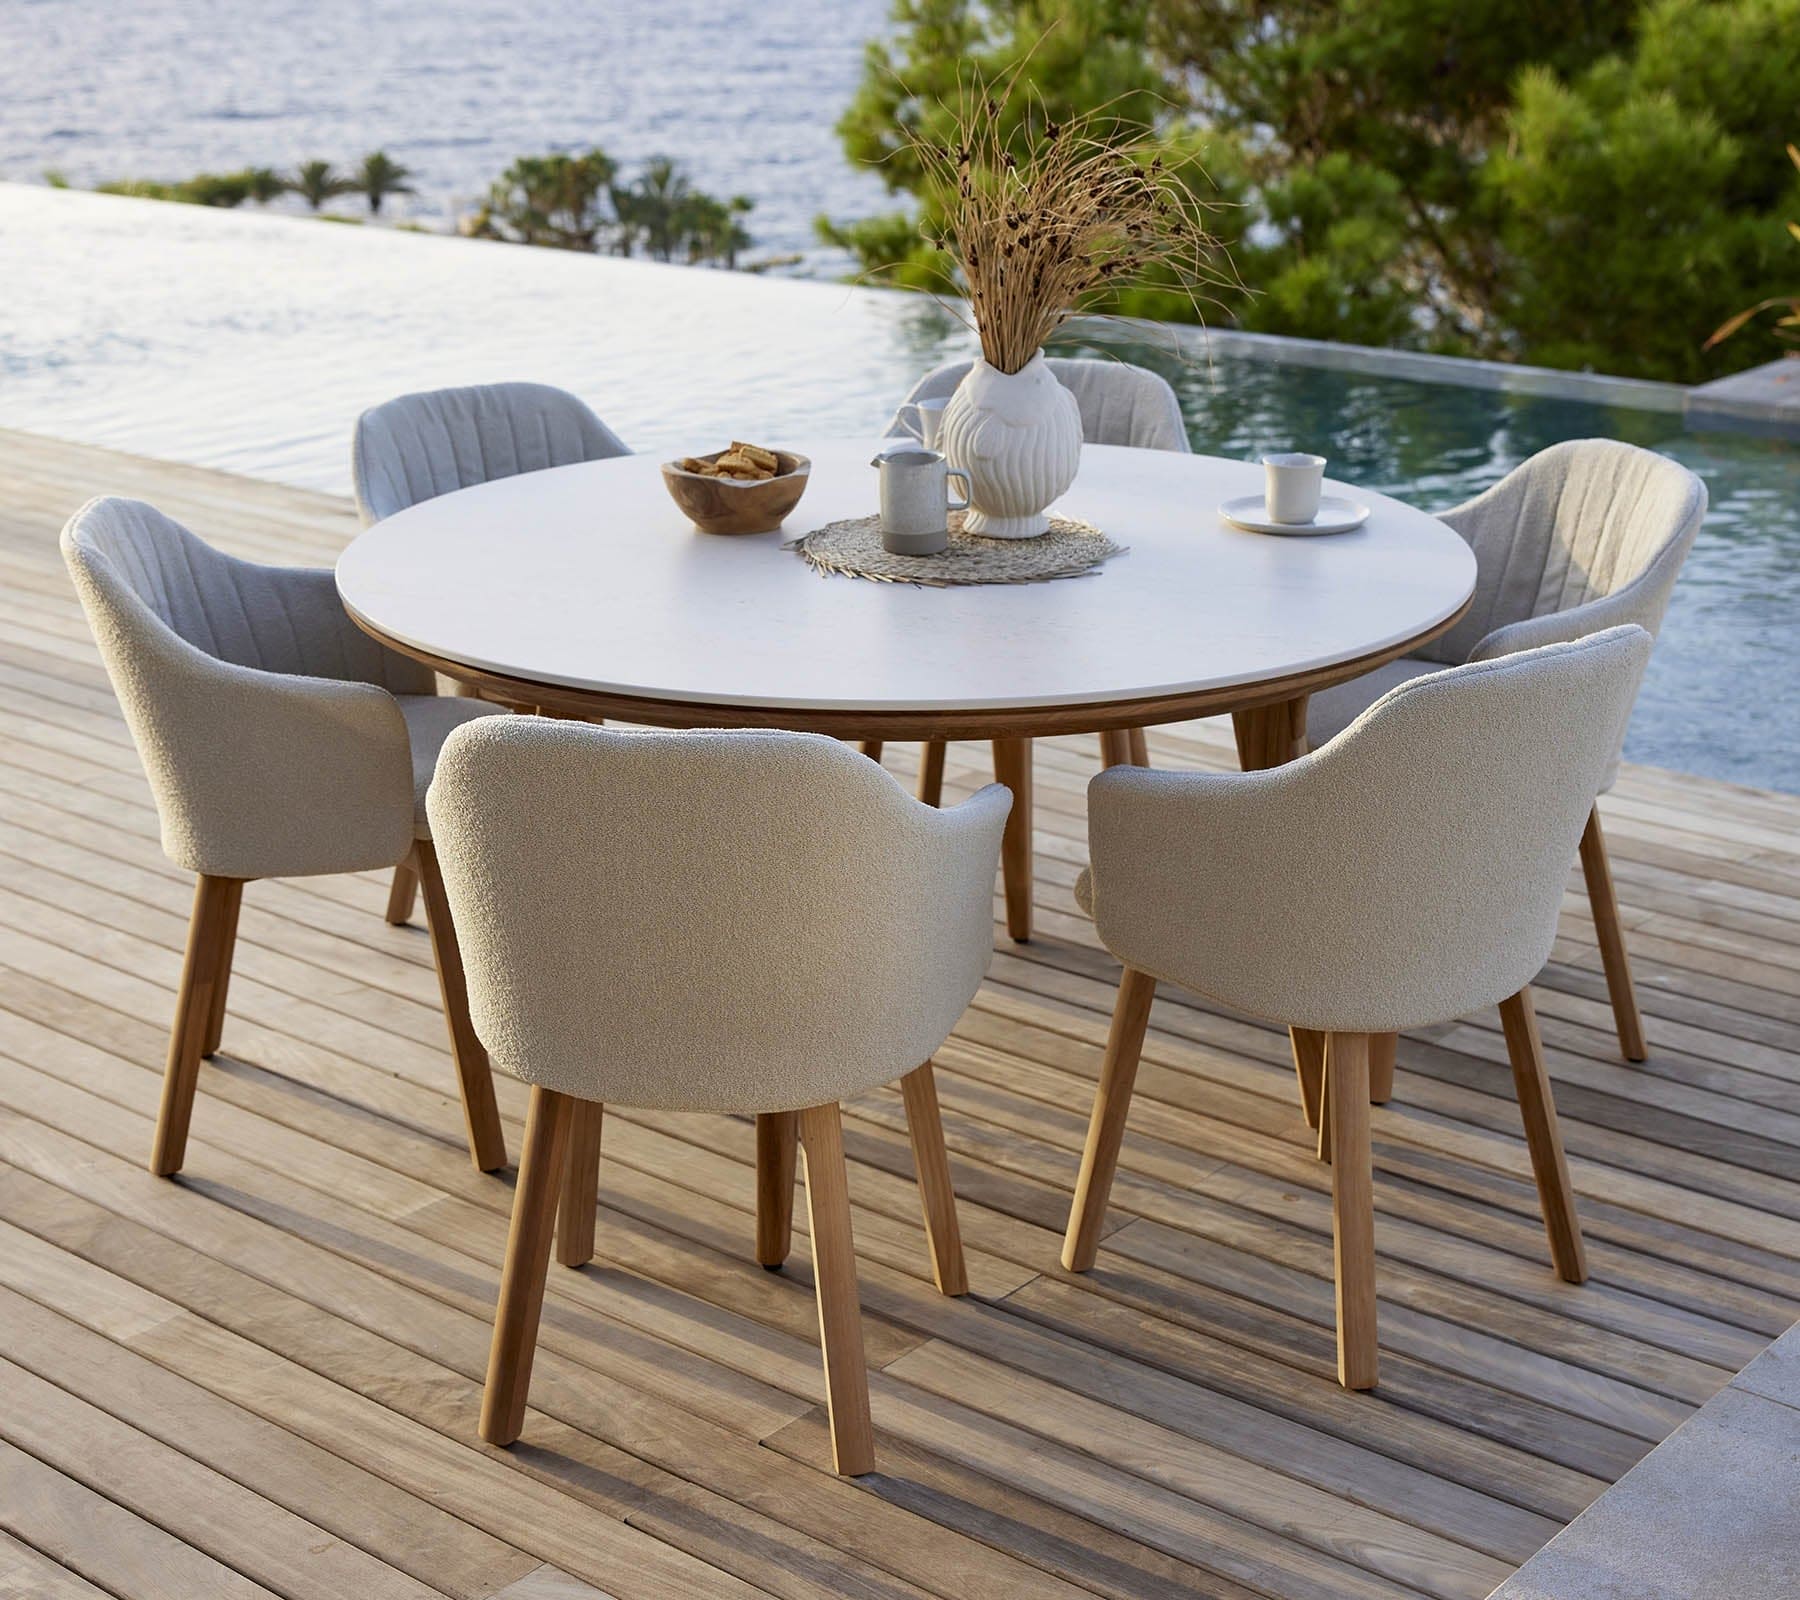 Boxhill's Choice Outdoor Dining Chair Teak Legs lifestyle image with Aspect Round Table beside the pool